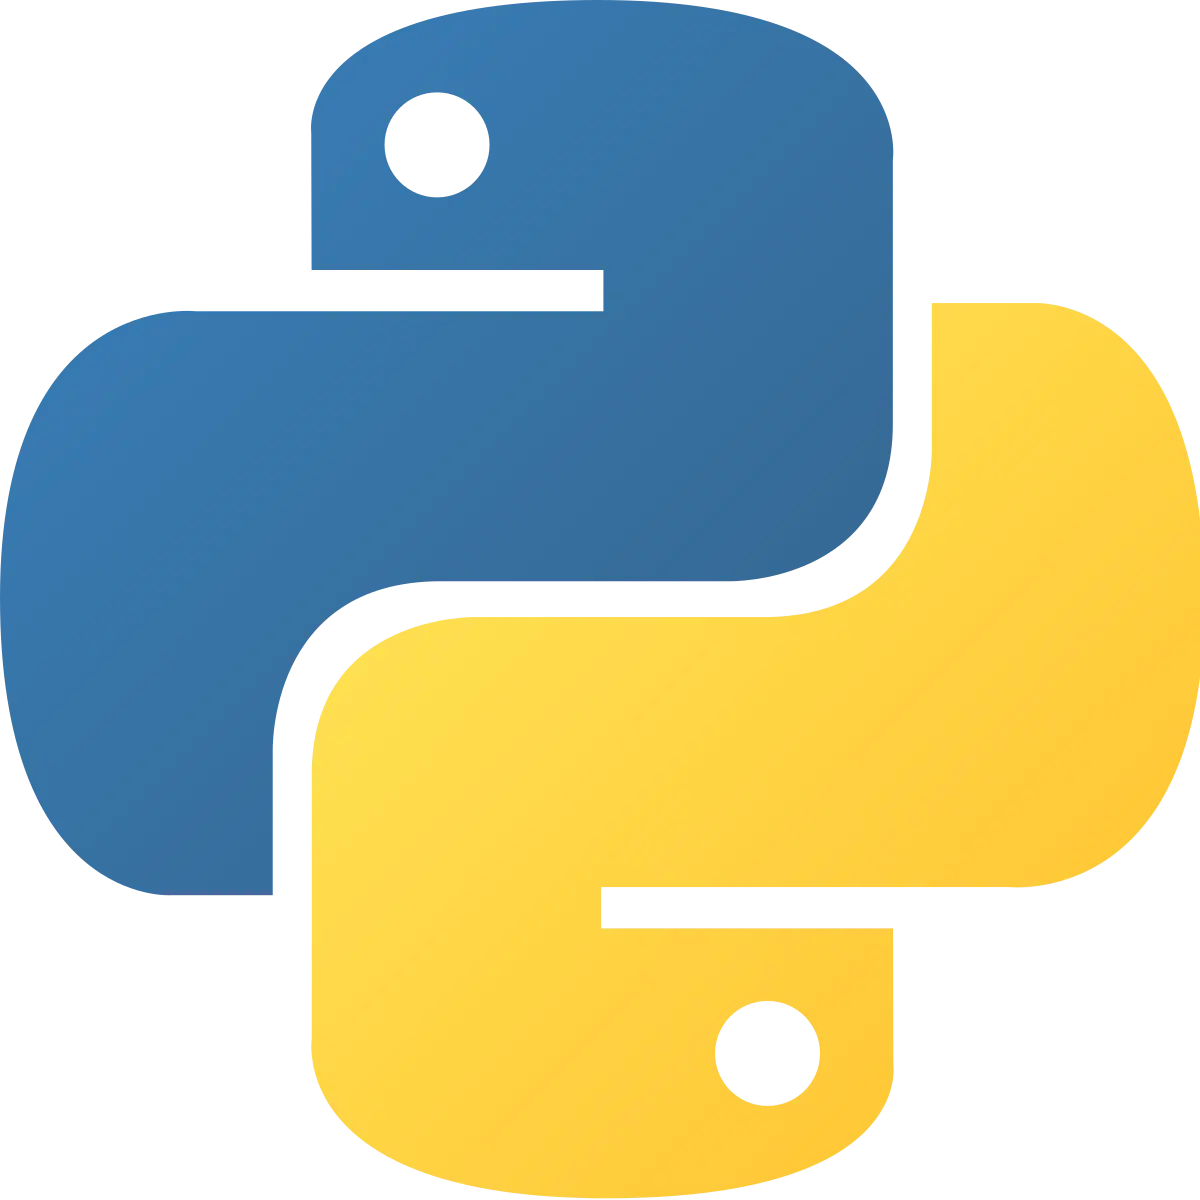 A step-by-step guide to setting up the environment for python and Django